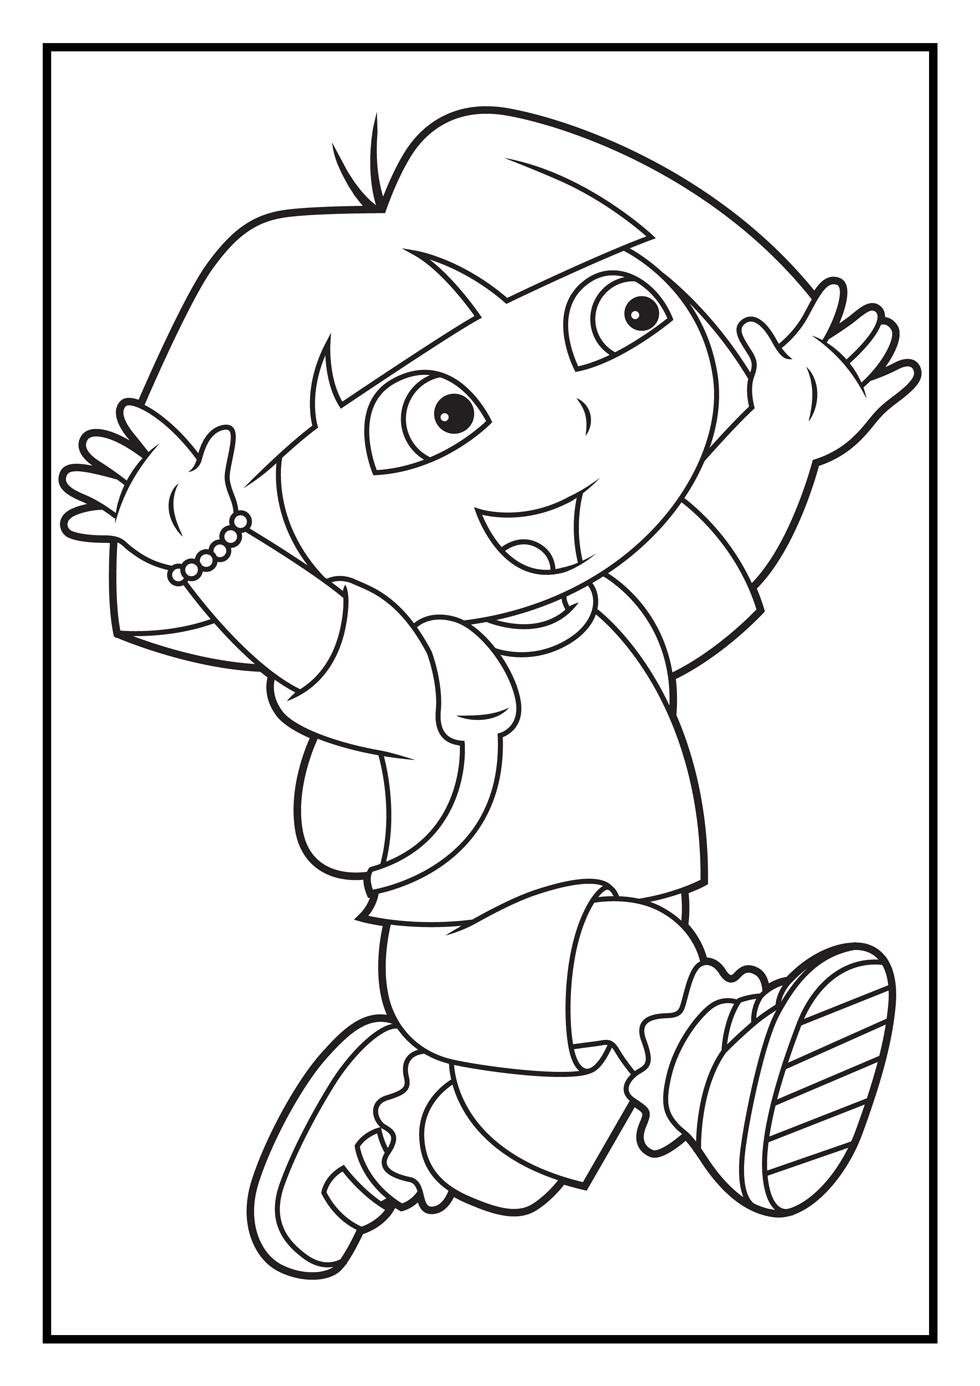 games of coloring pages - photo #13